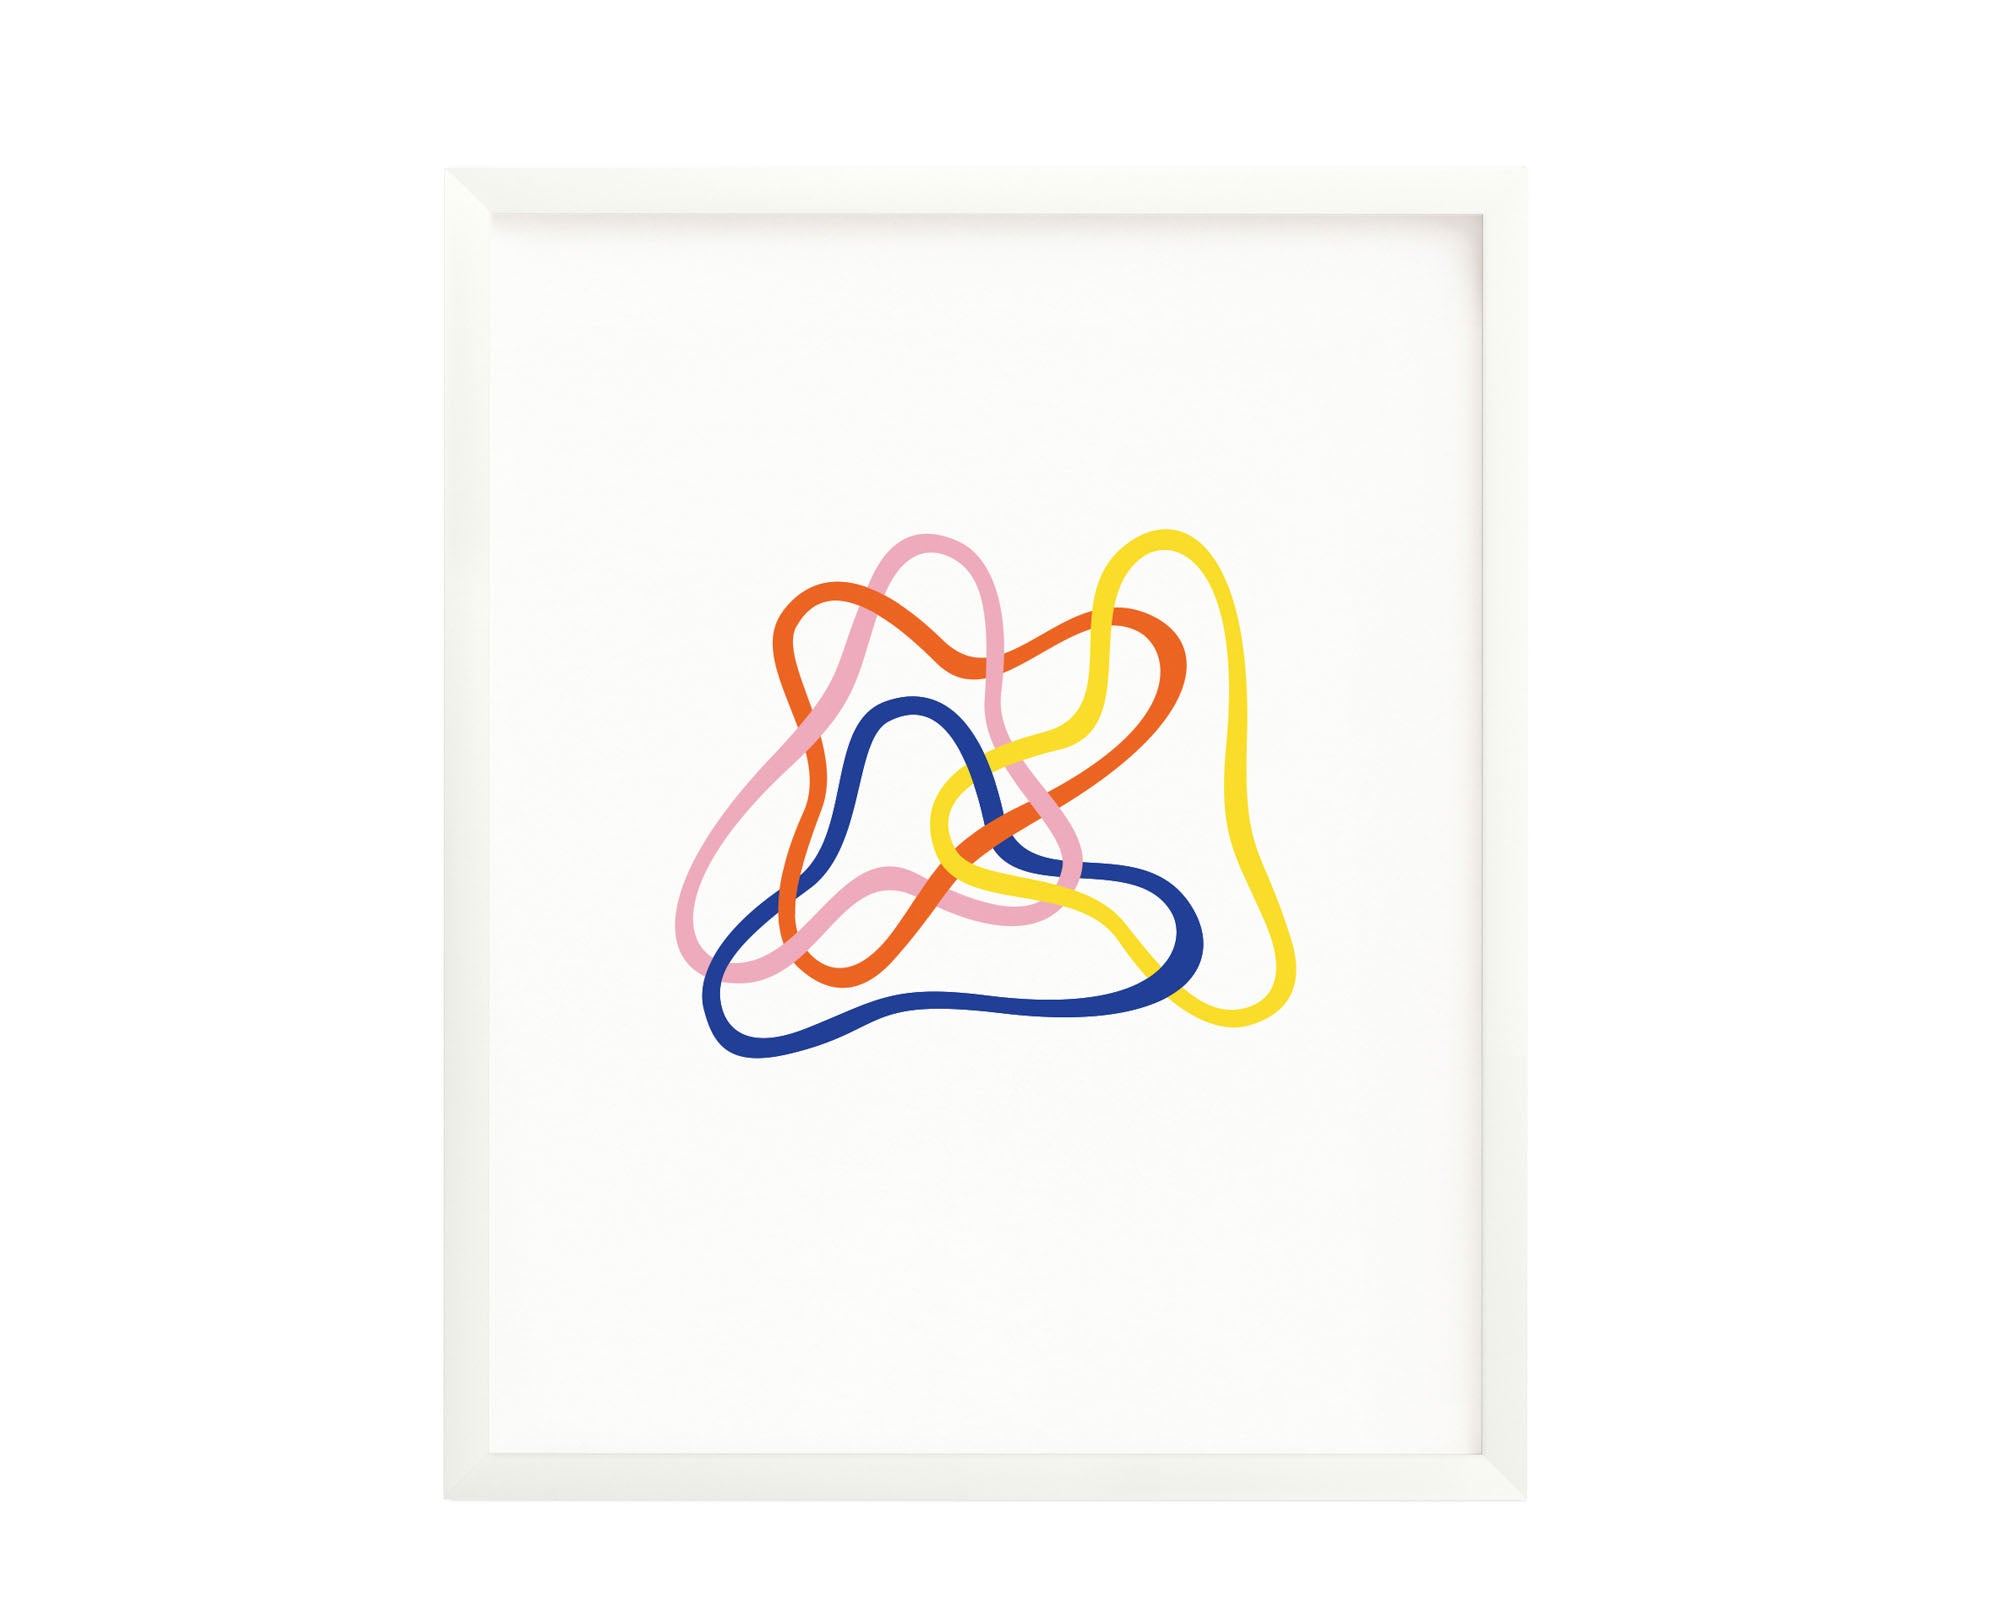 "Tangled" graphic interwoven squiggle archival giclée art print. Made in USA by My Darlin' @mydarlin_bk